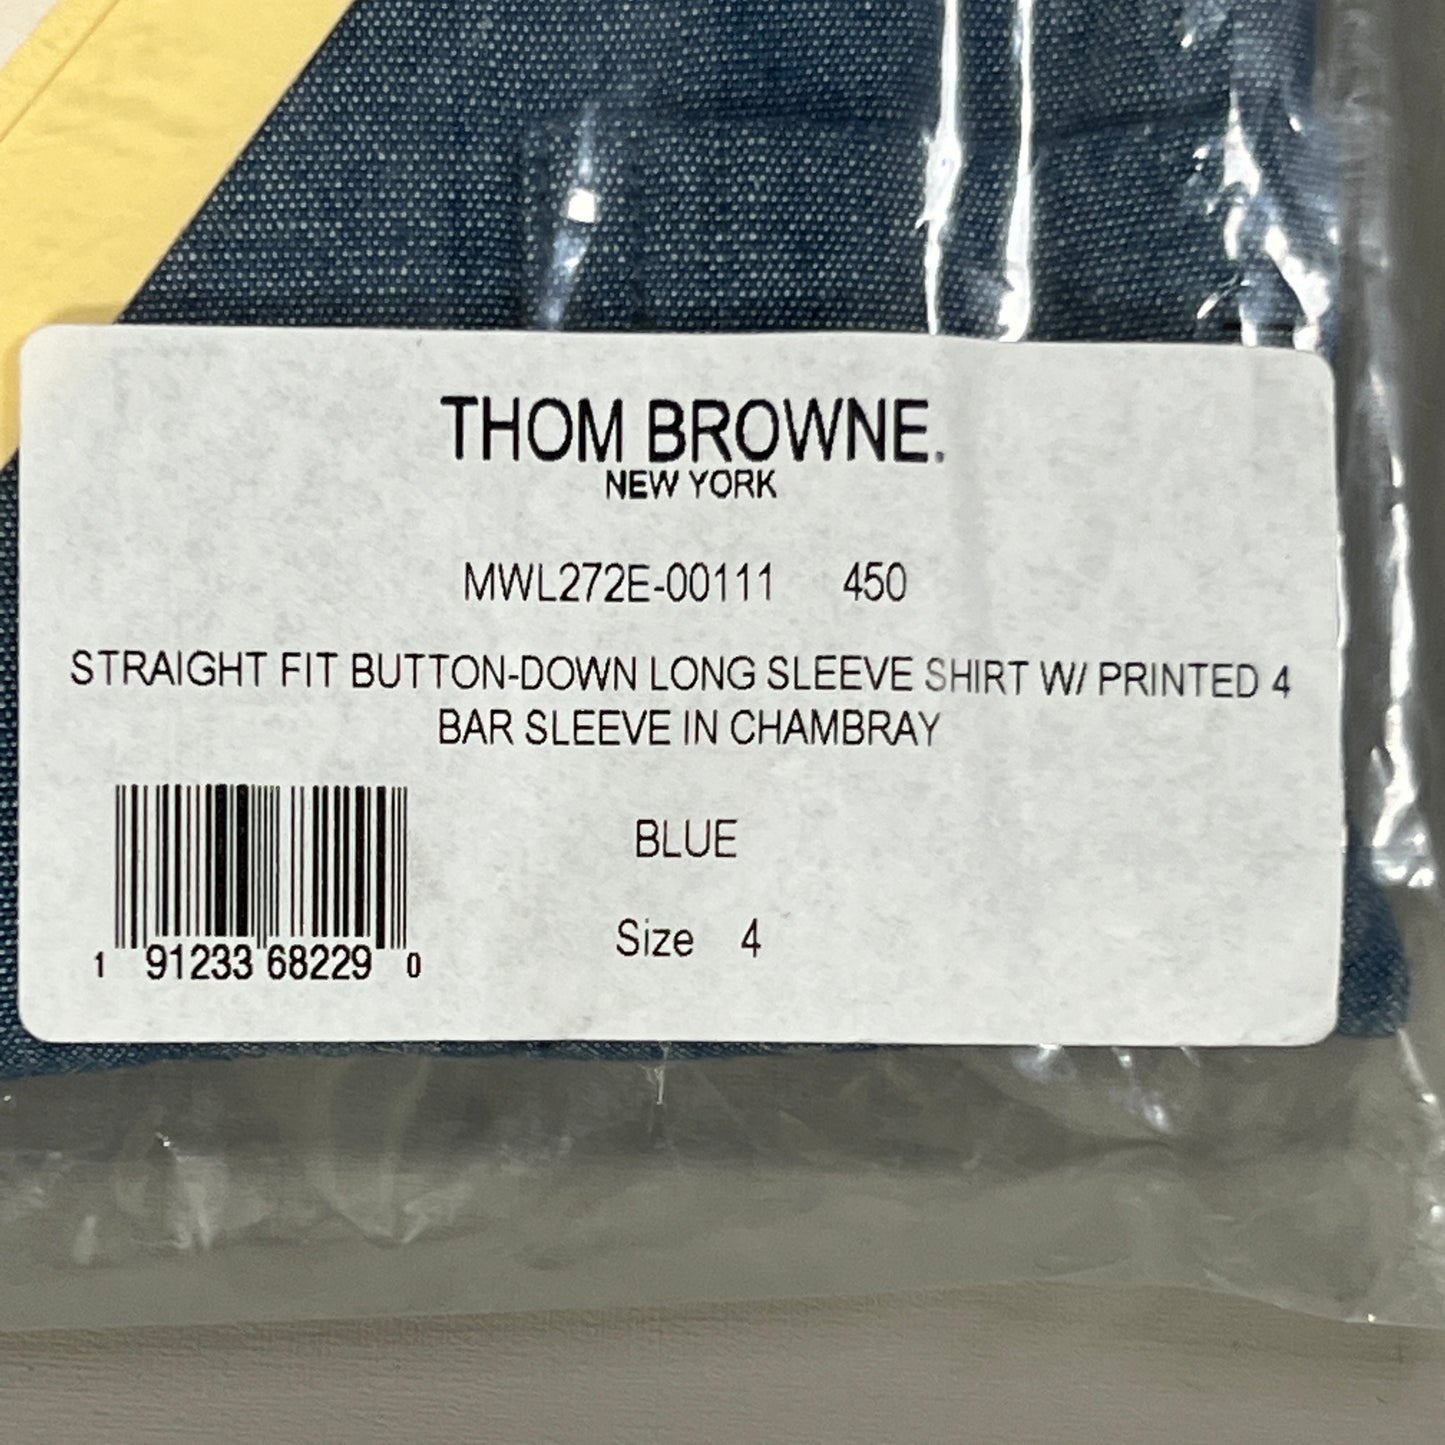 THOM BROWNE Straight Fit Button-Down Long Sleeve Shirt w/printed 4 Bar Sleeve in Chambray Blue Size 4 (NEW)